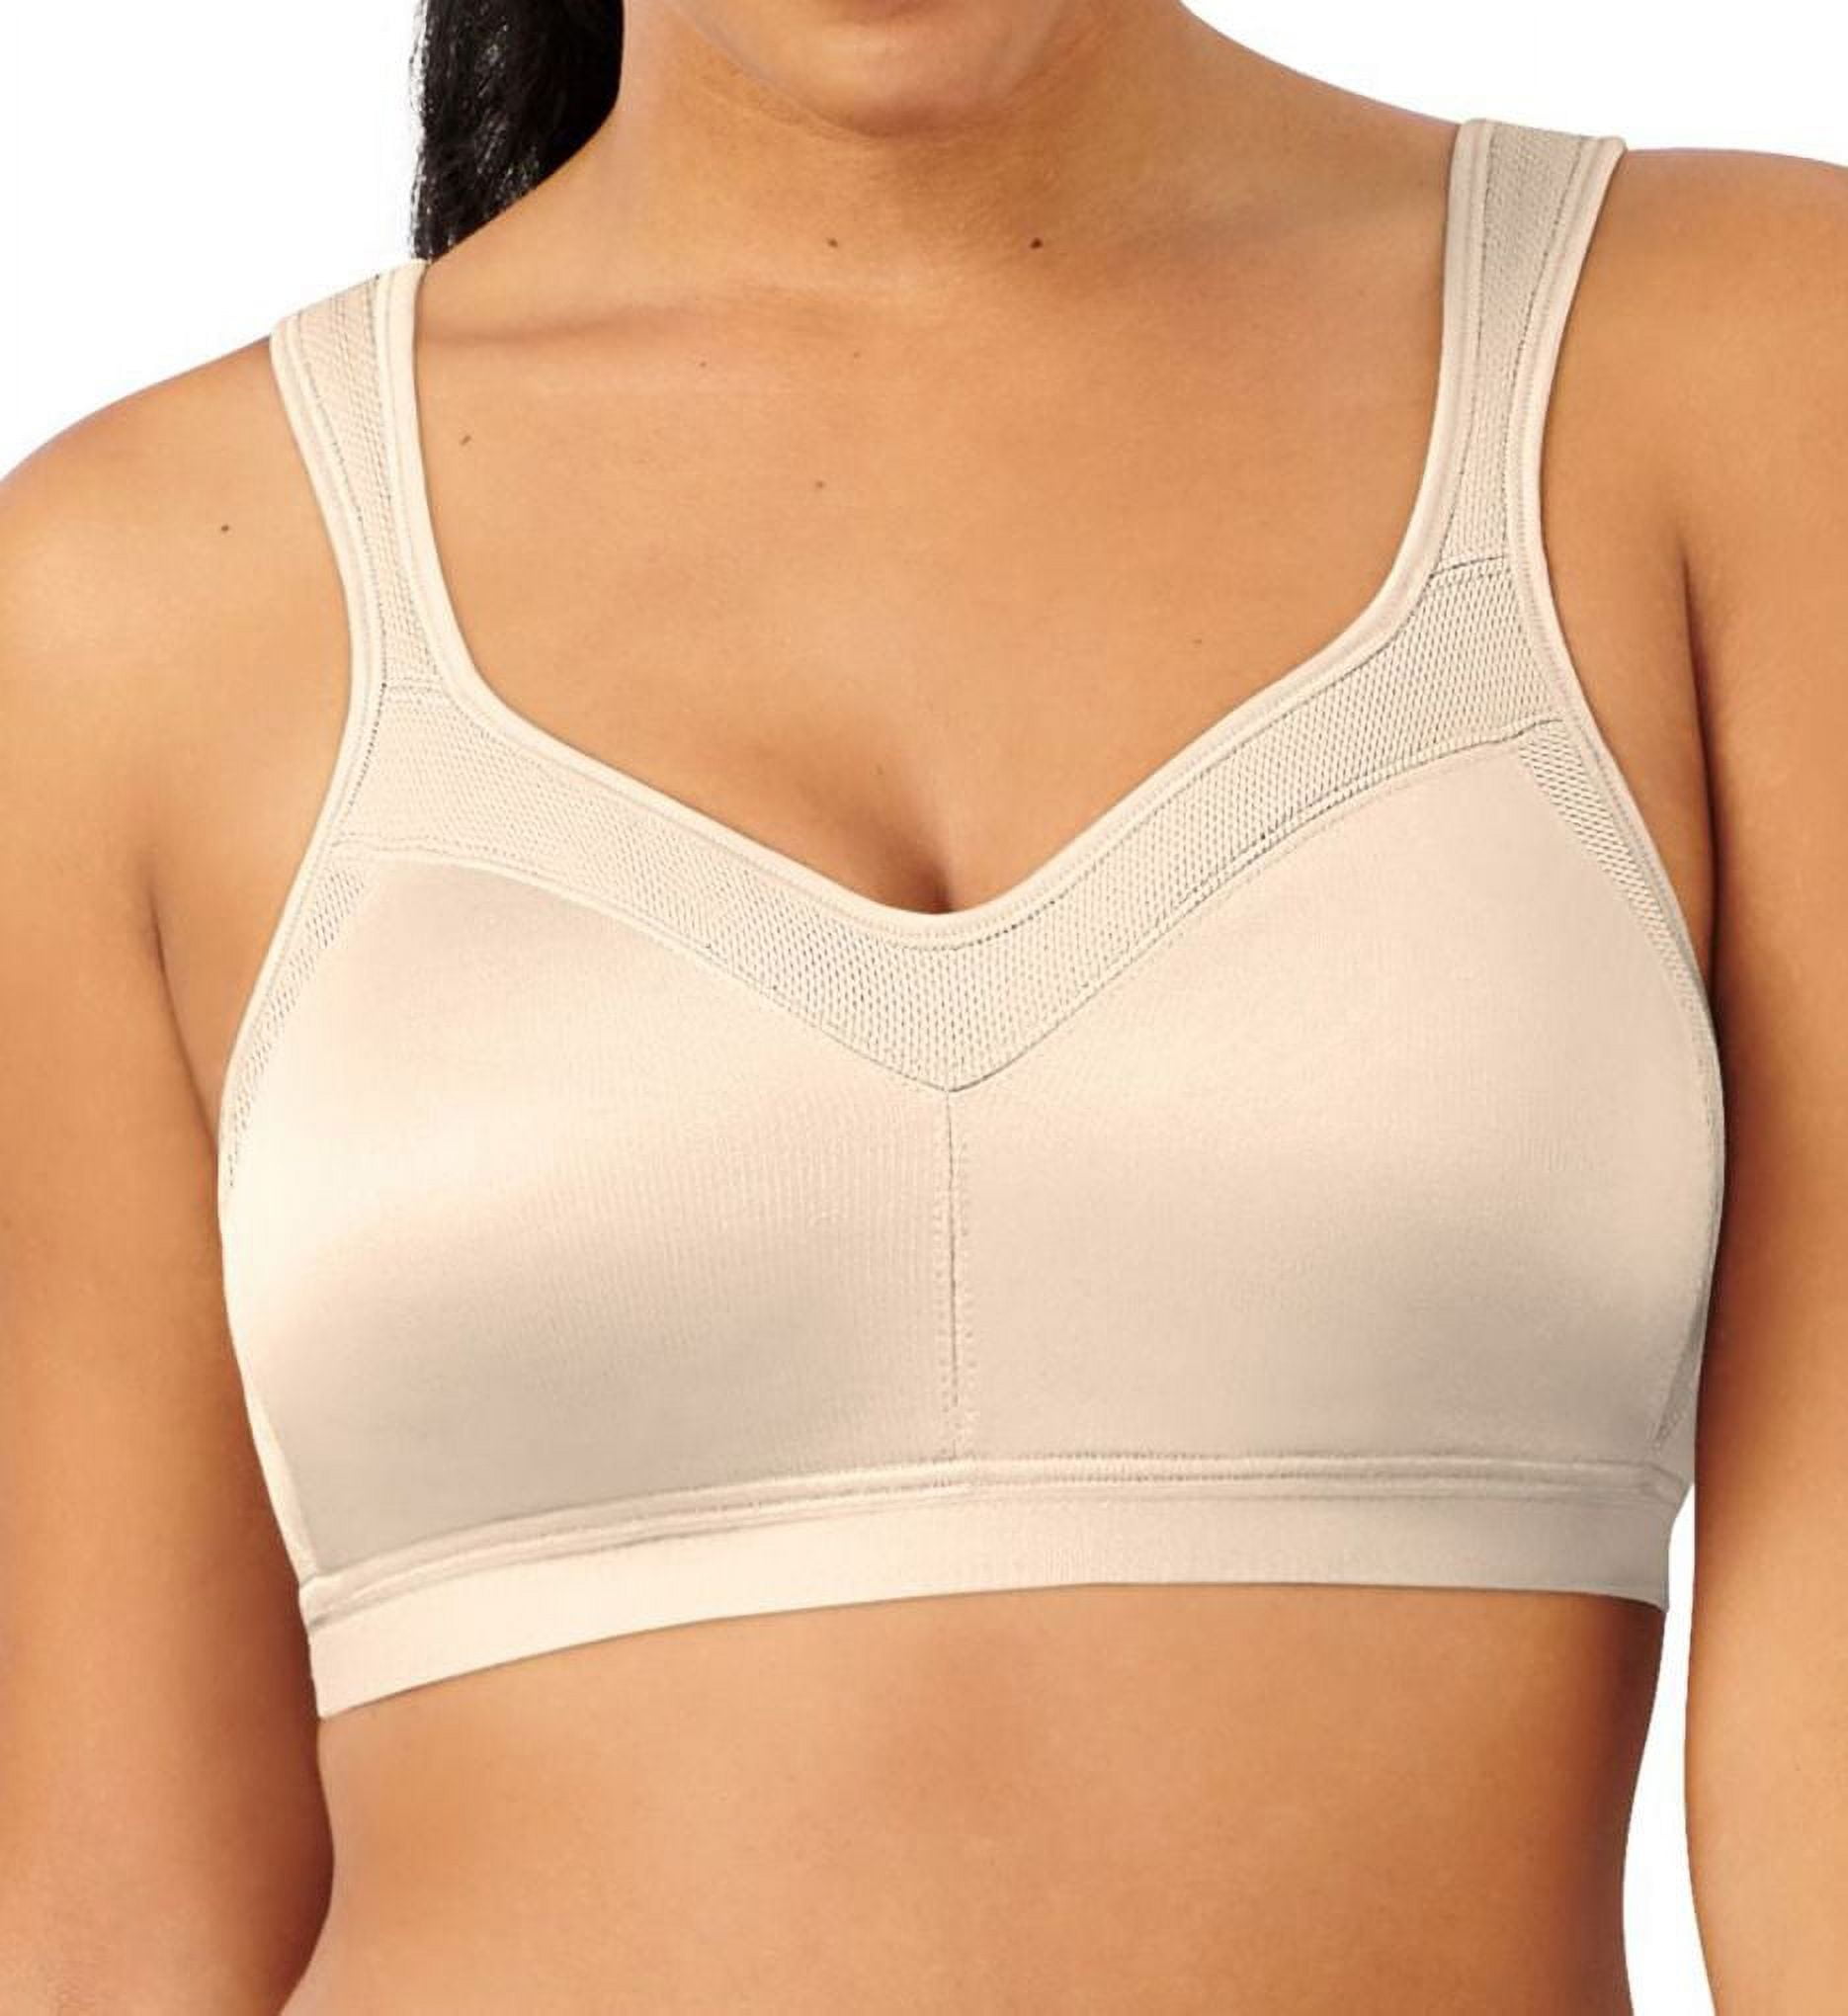 Playtex 18 Hour, Super Soft, Cool and Breathable Wireless Bra P4690